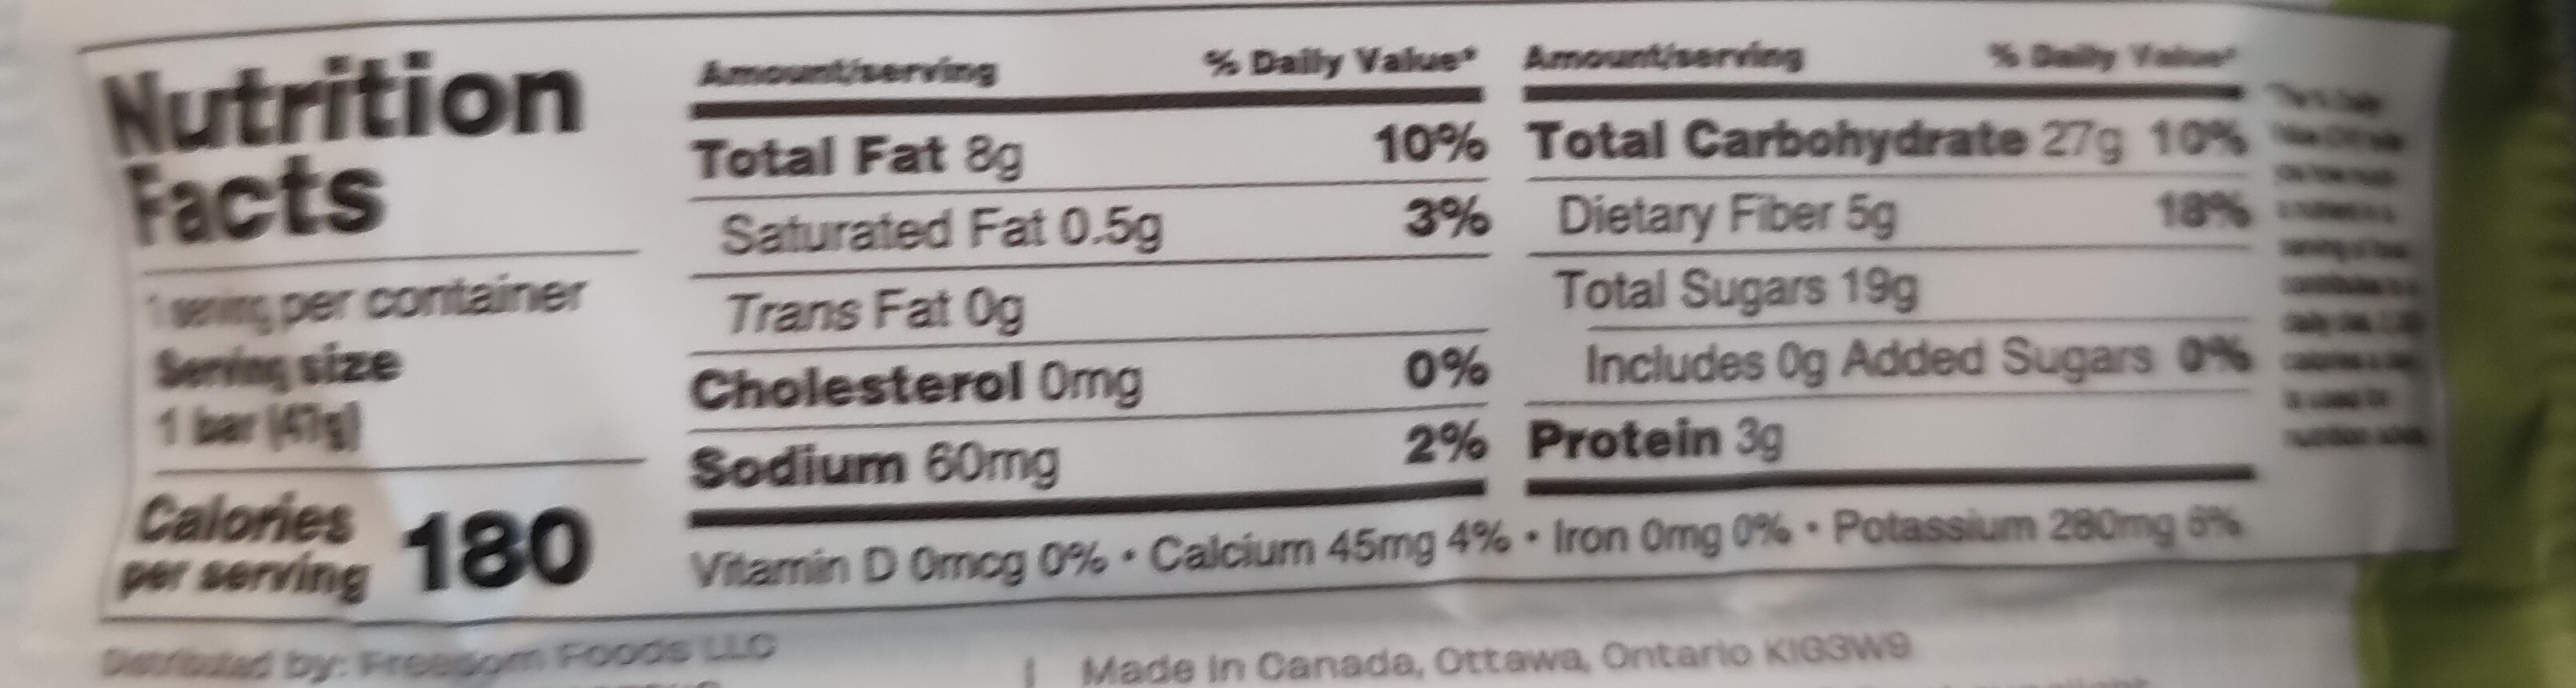 free from - Nutrition facts